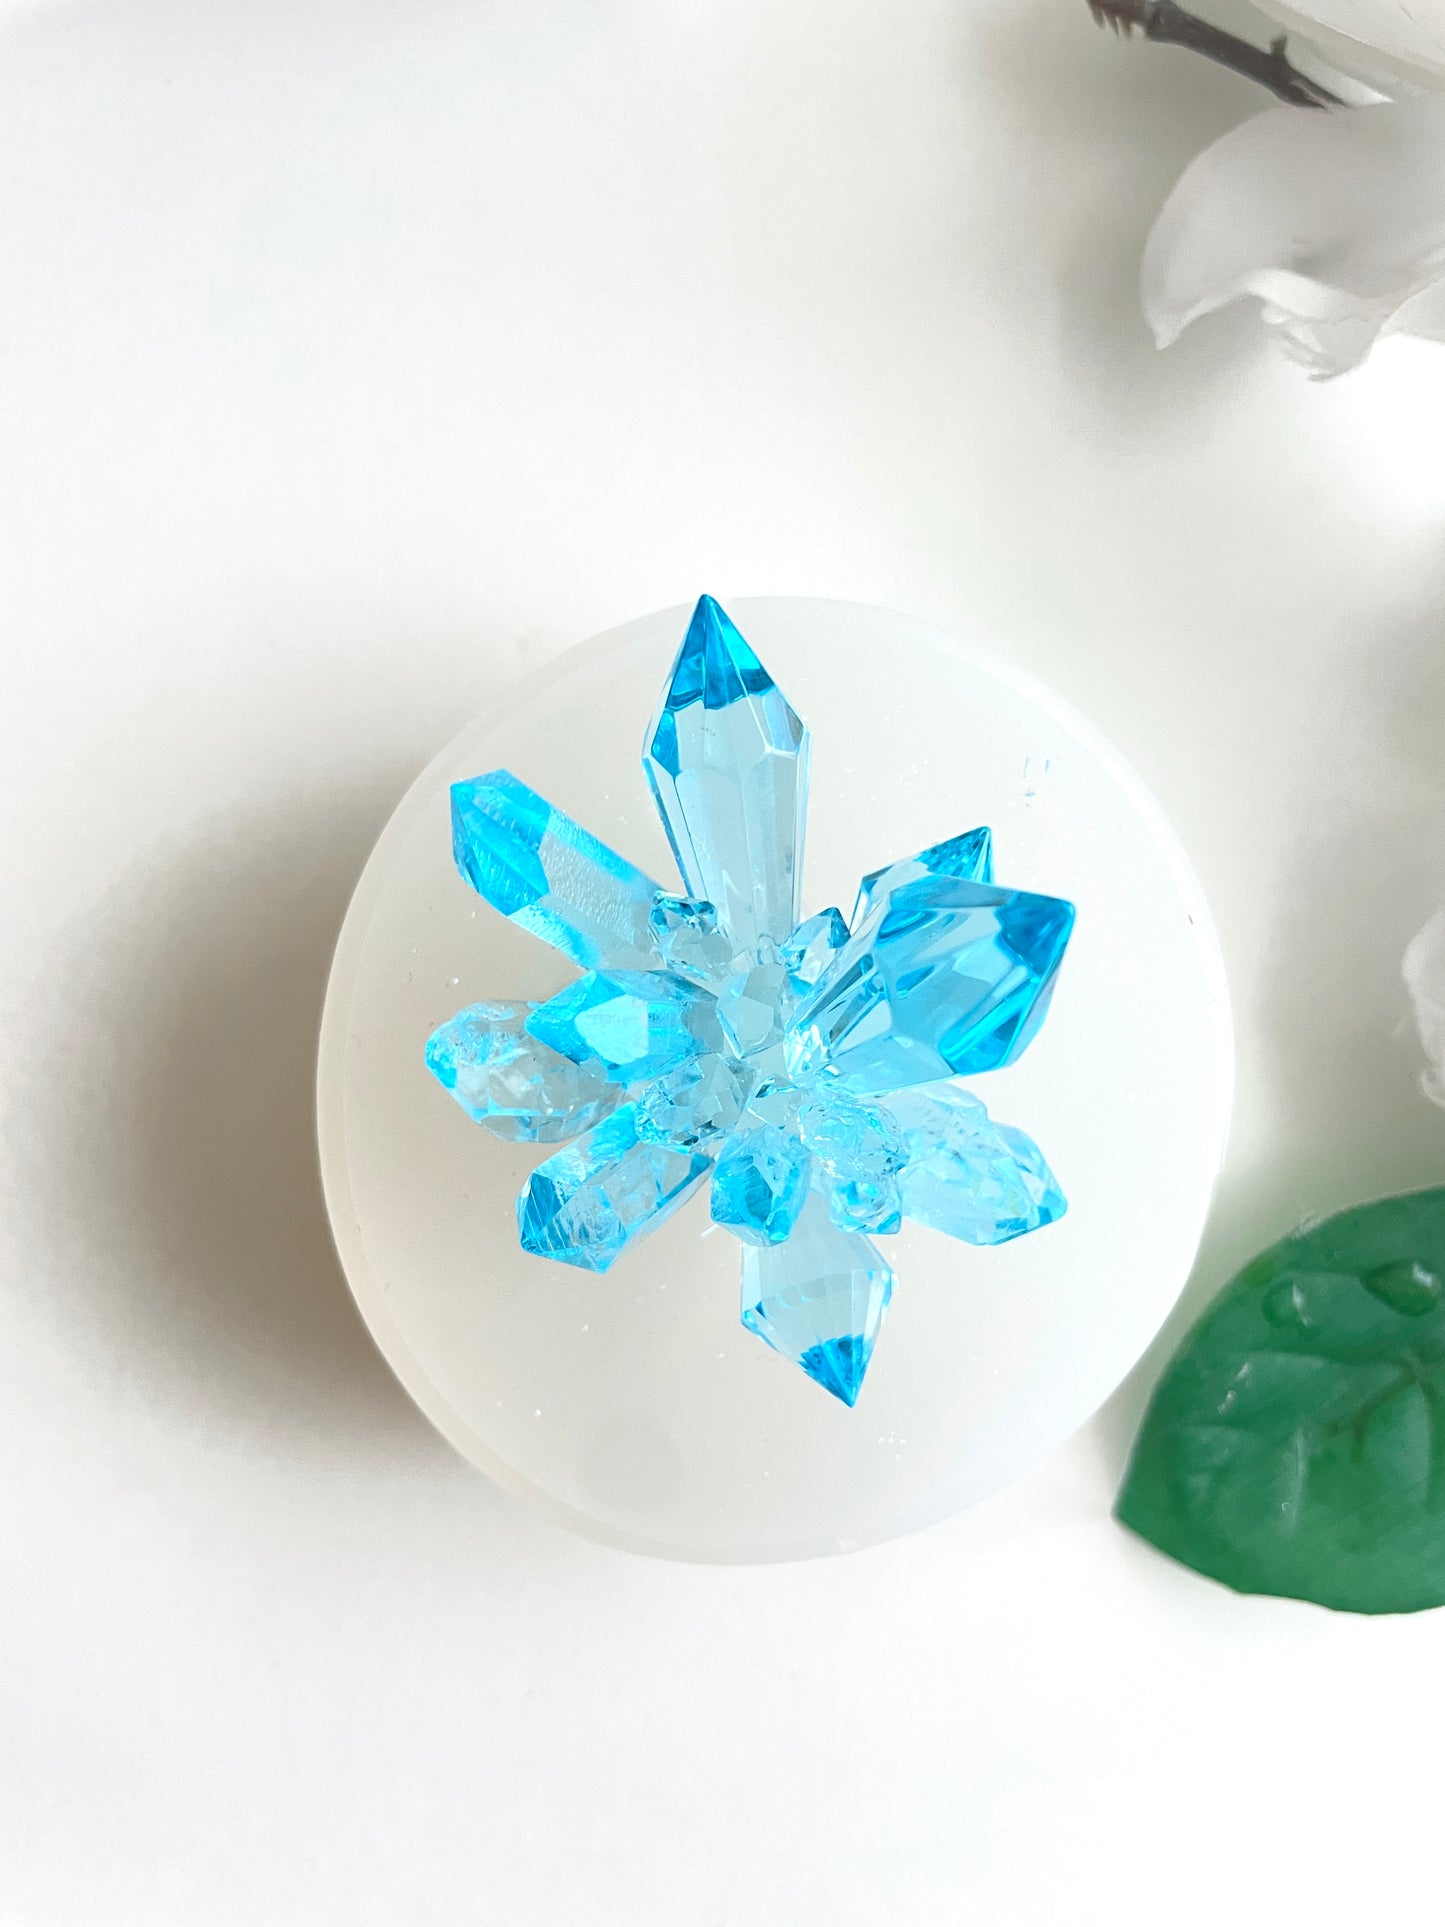 Crystal Formations Awakened: New Resin Silicone Mold